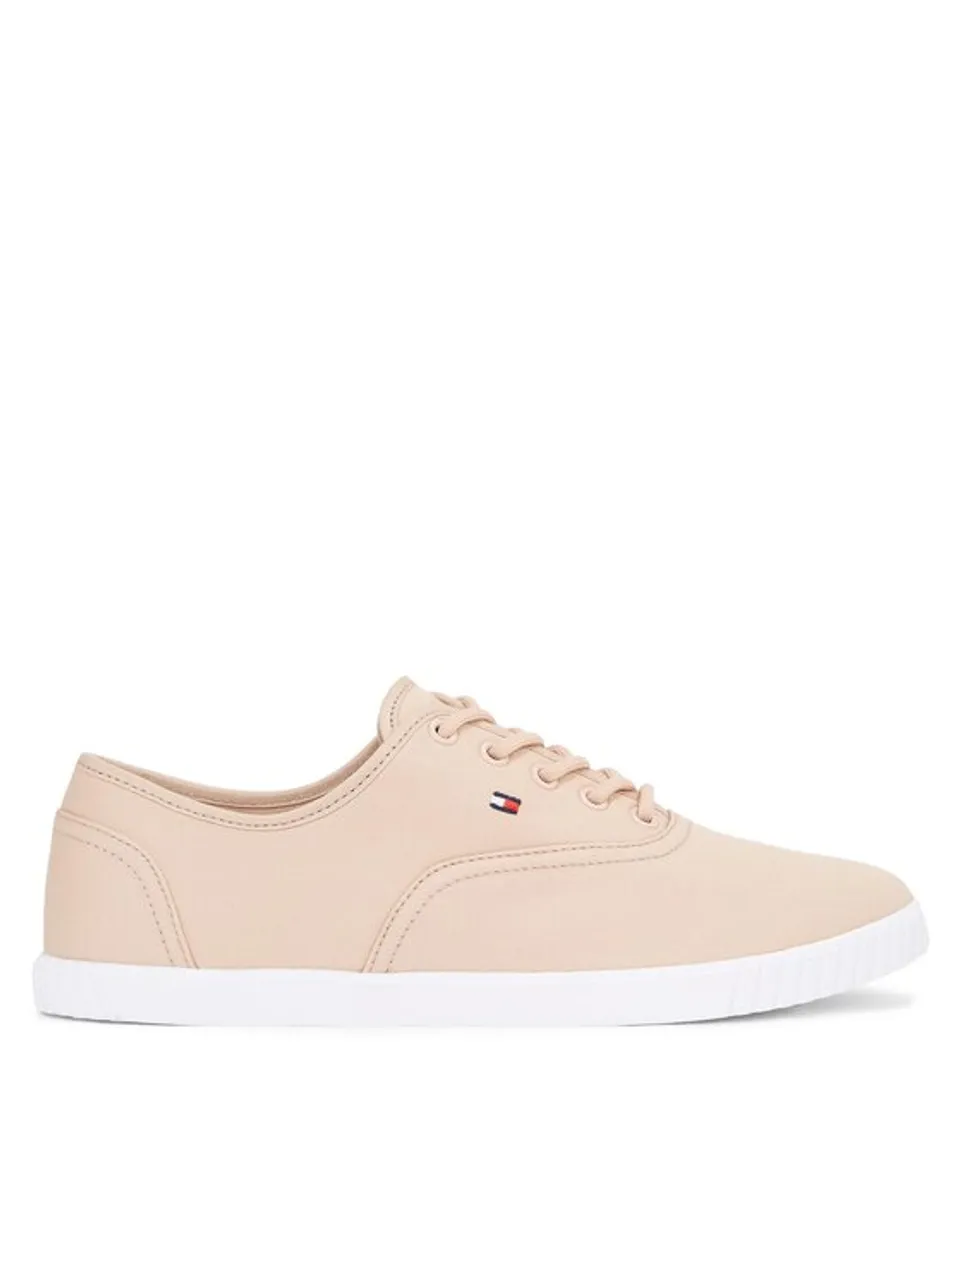 Tommy Hilfiger Sneakers aus Stoff Canvas Lace Up Sneaker FW0FW07805 Dunkelblau